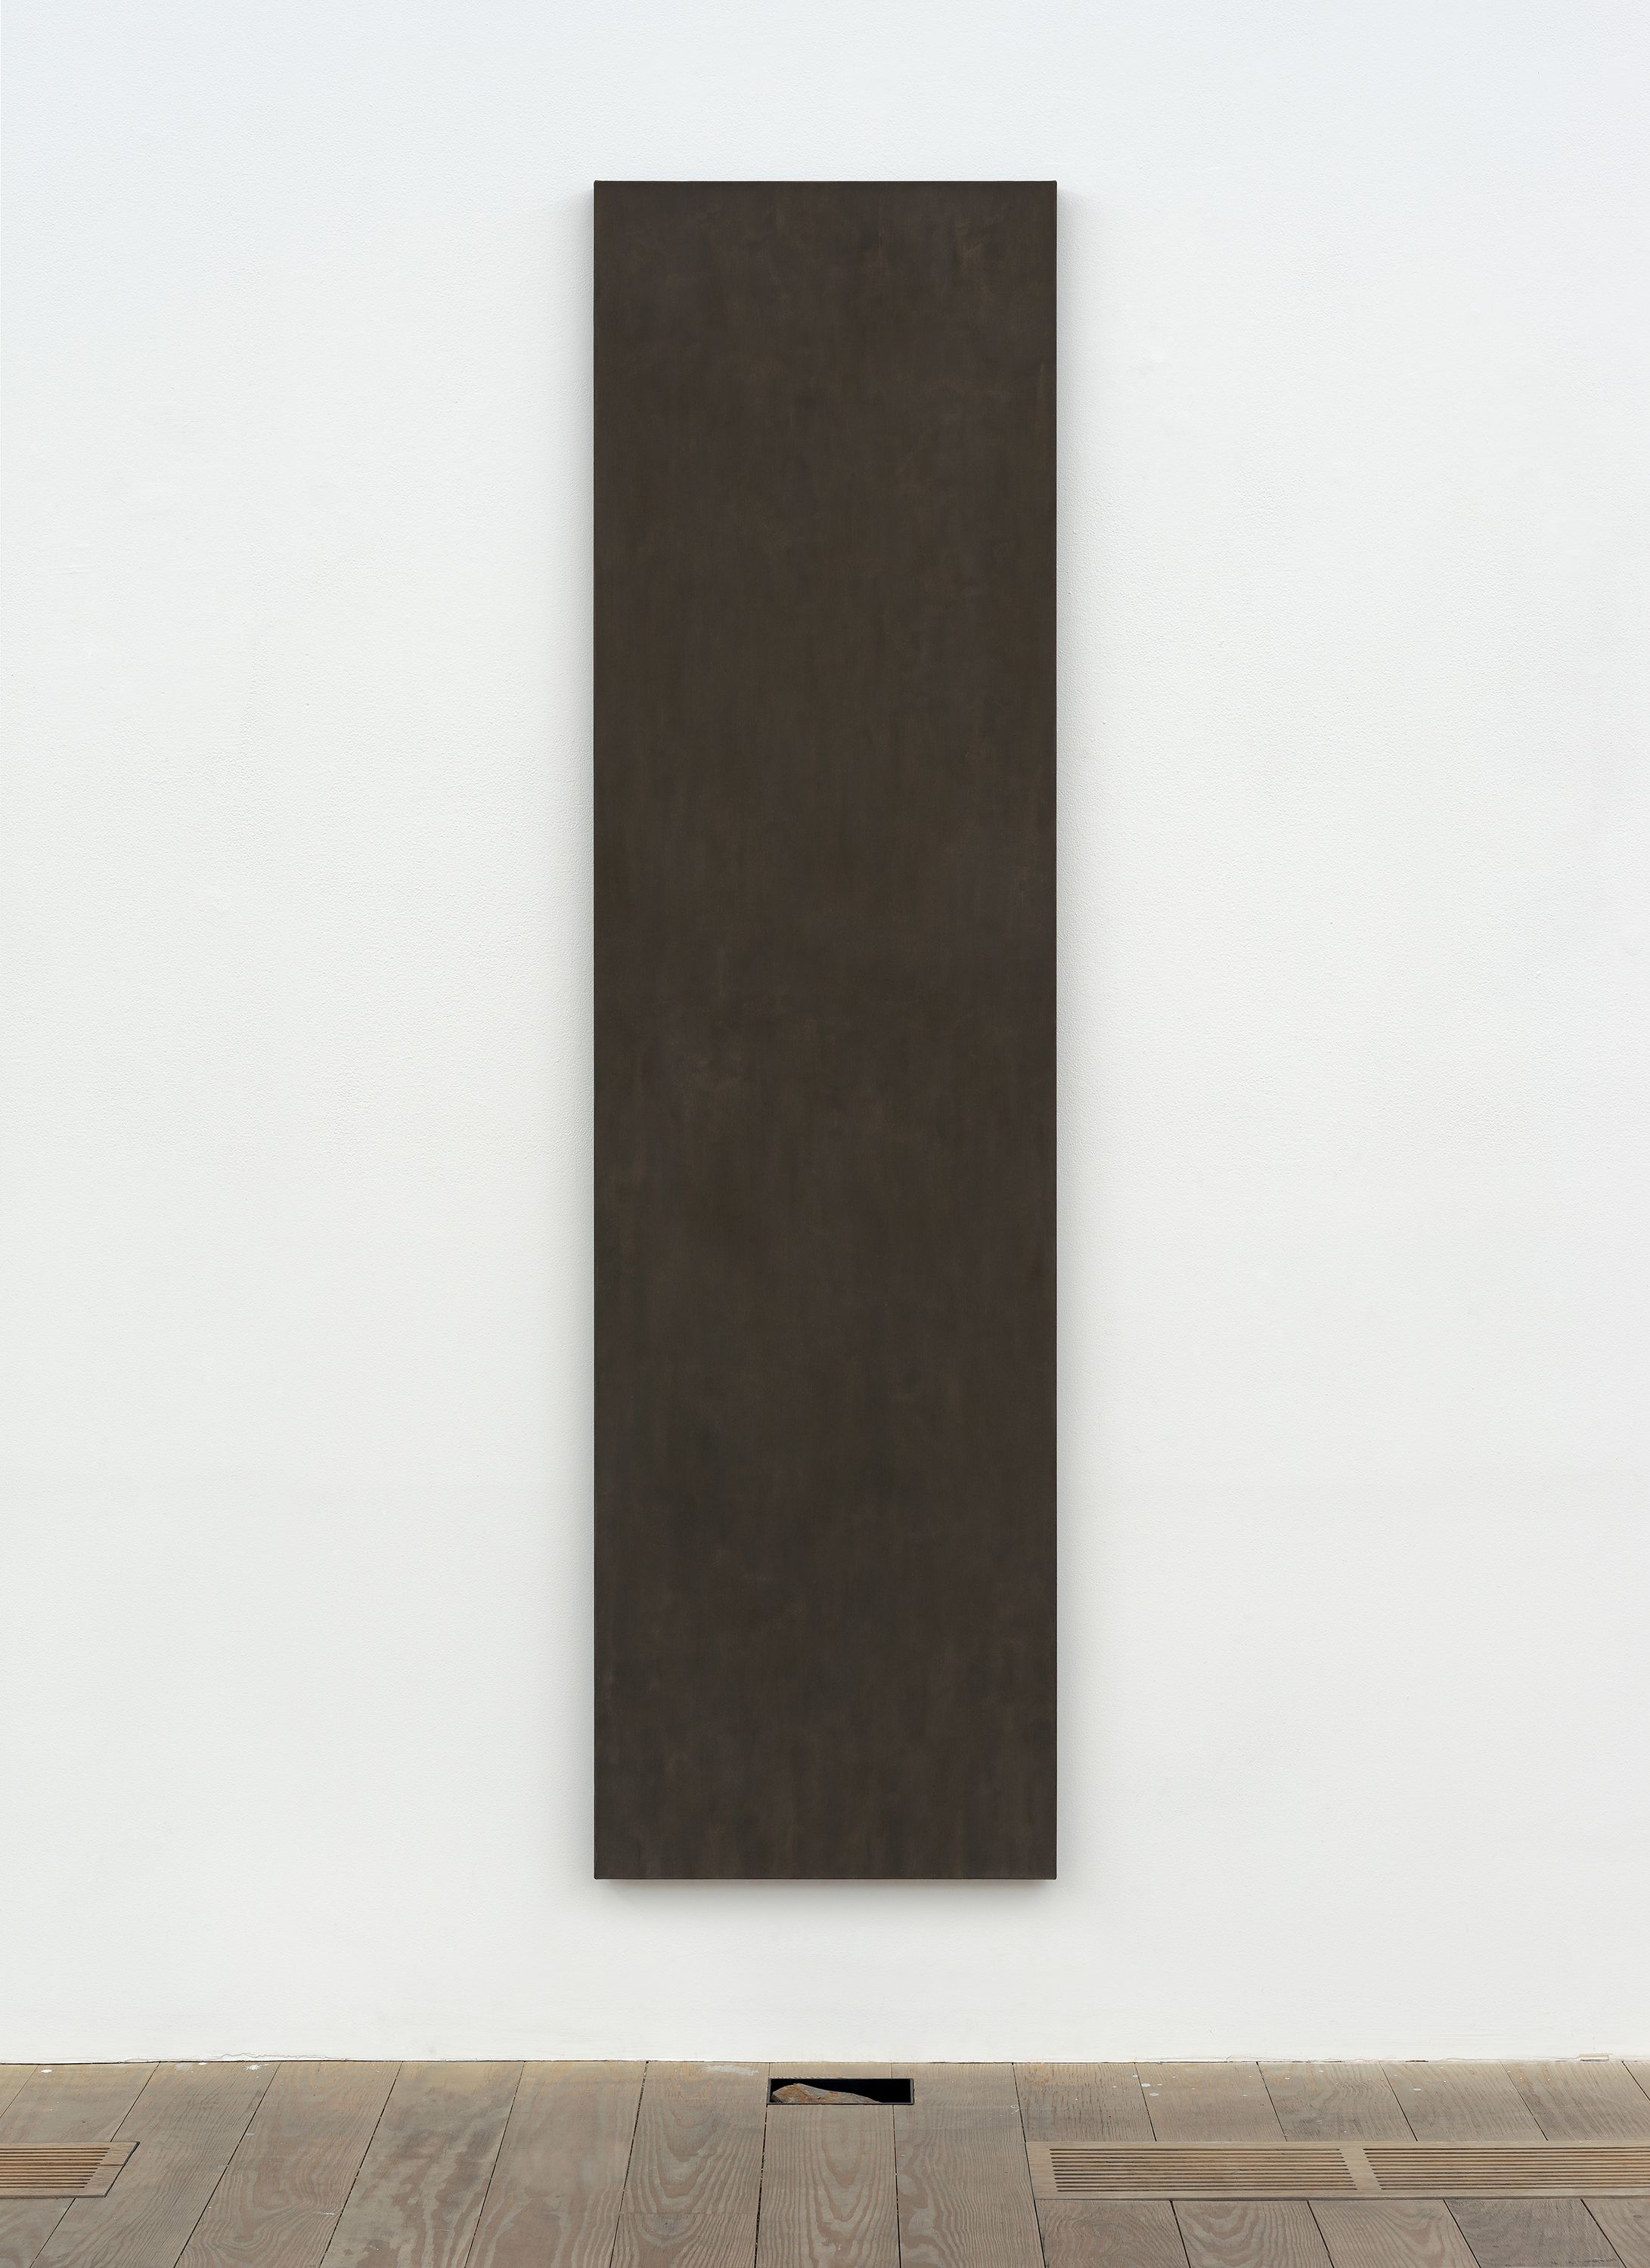 London, 2015, London clay, binder, linen, 70 x 19 and 5 3/4 x 3 7/16 x 2 1/2 in. MW_FP3384